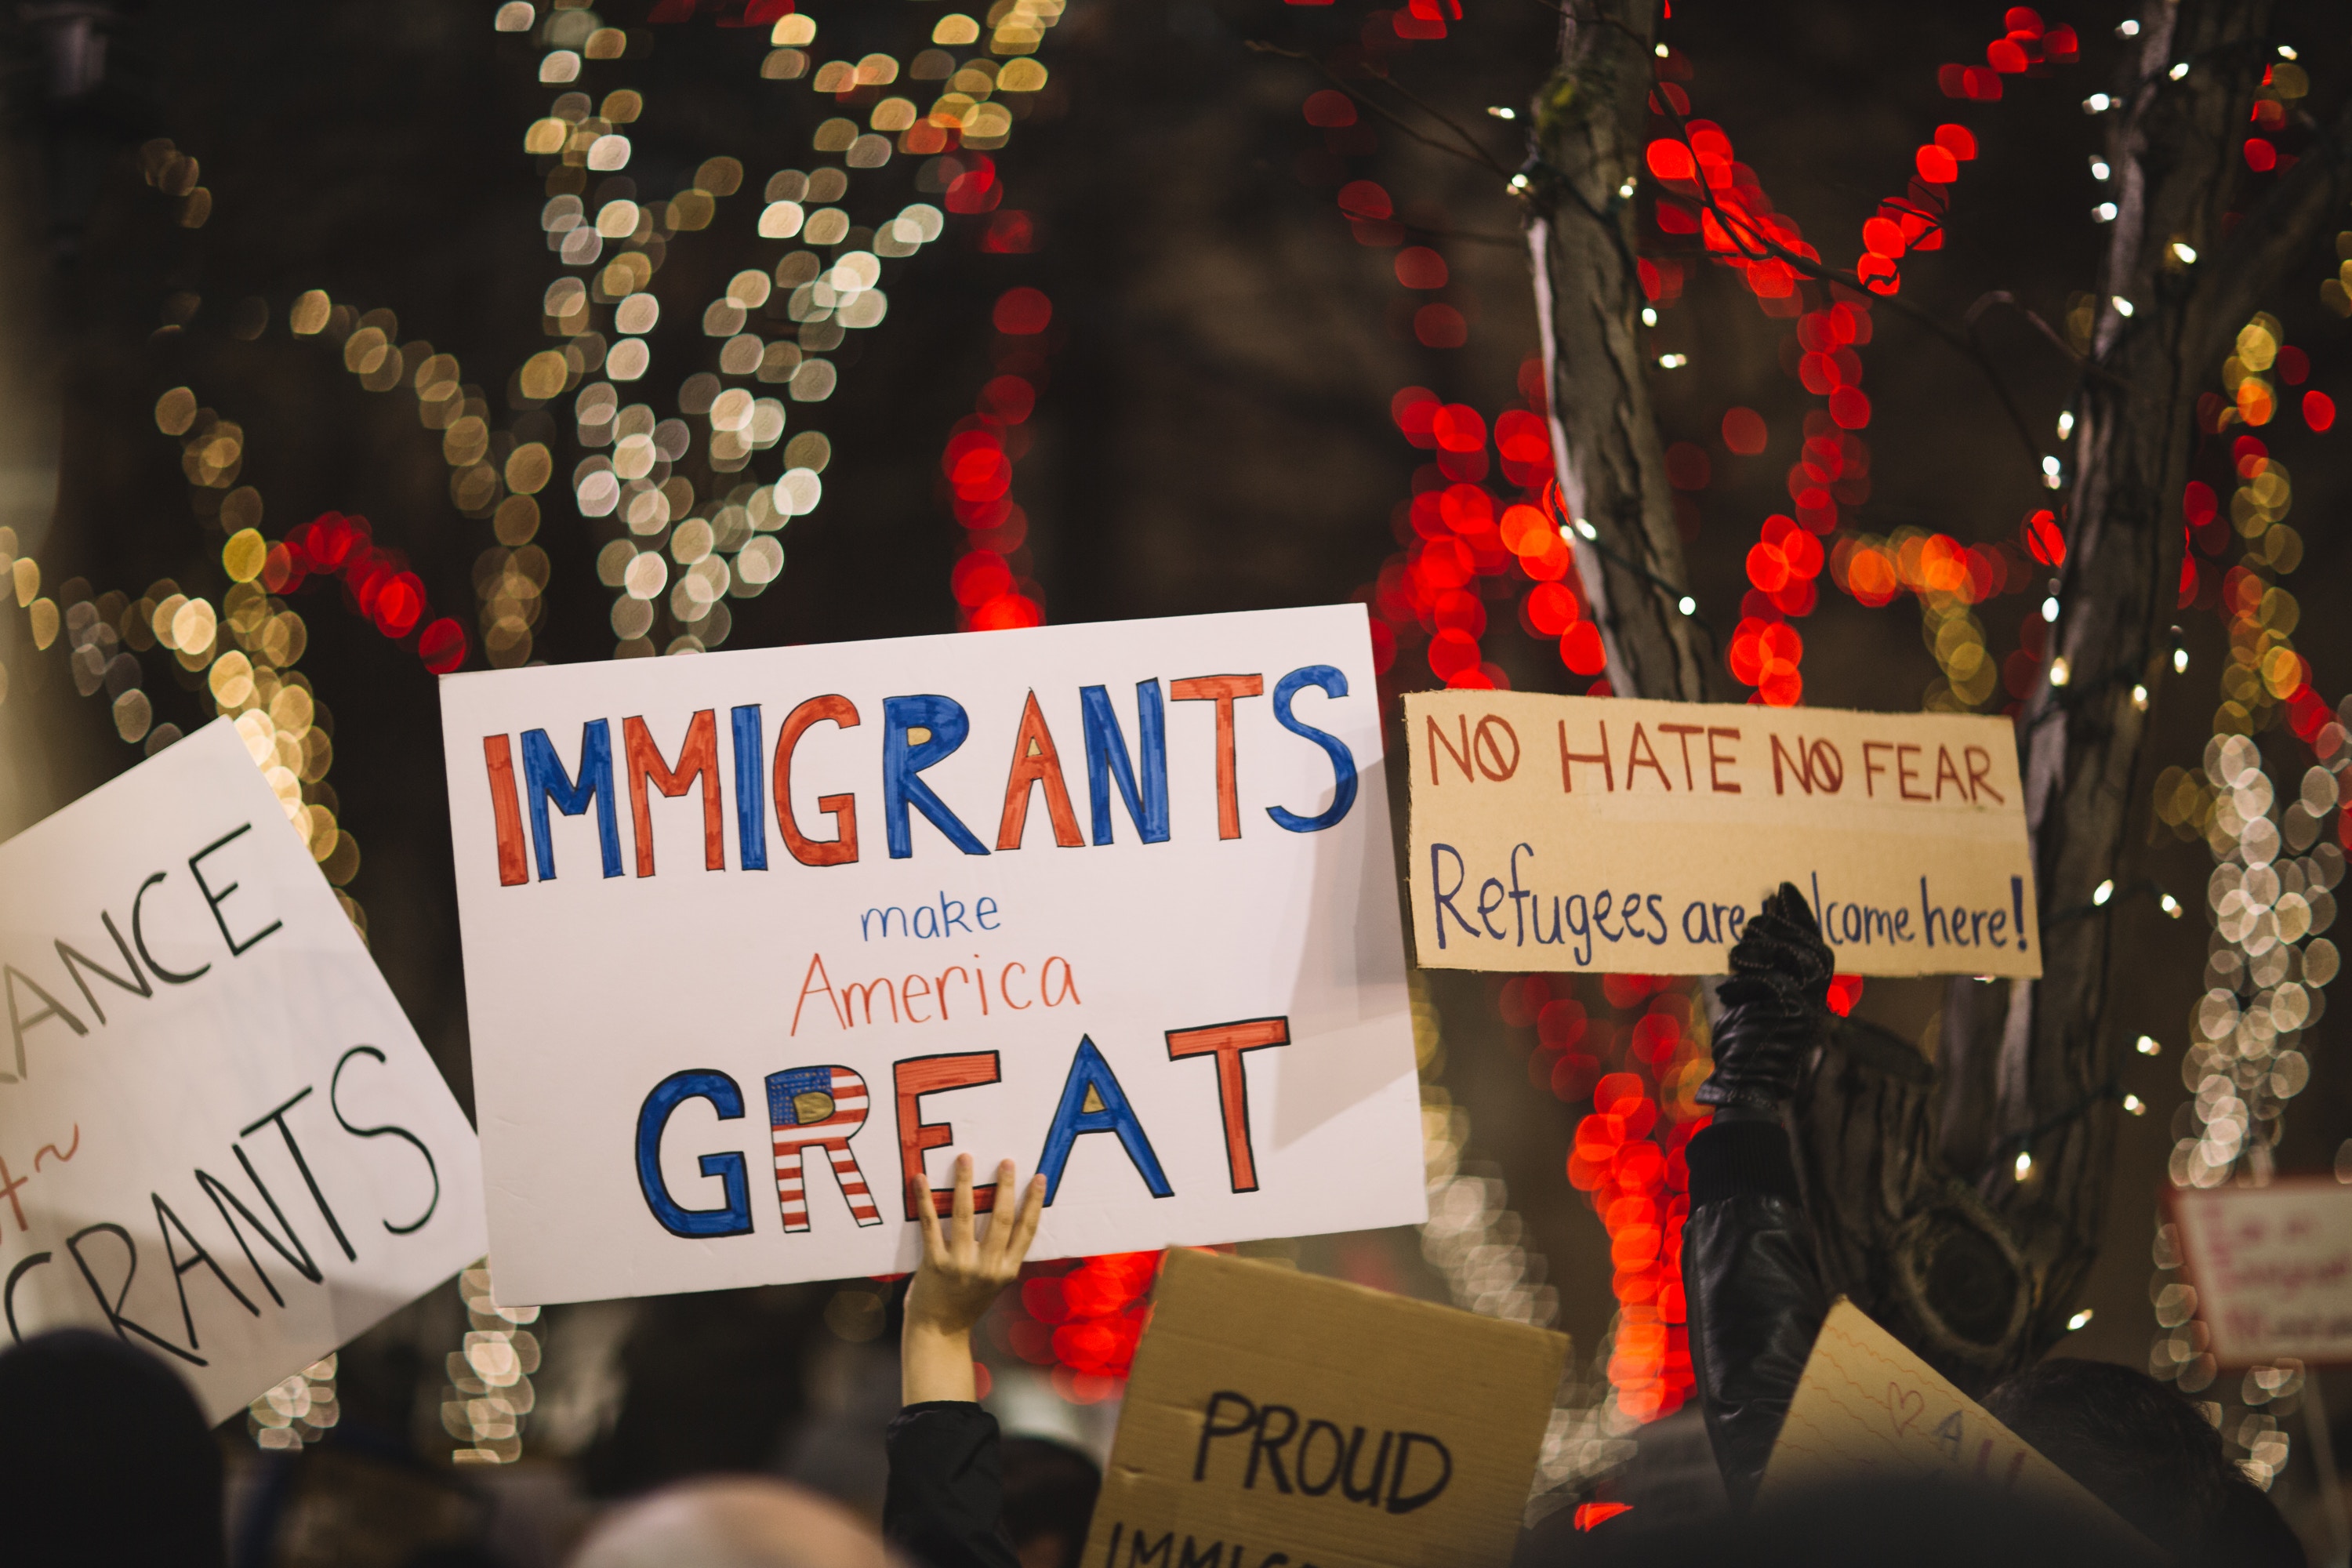 Trump Immigration Policy posters in a protest